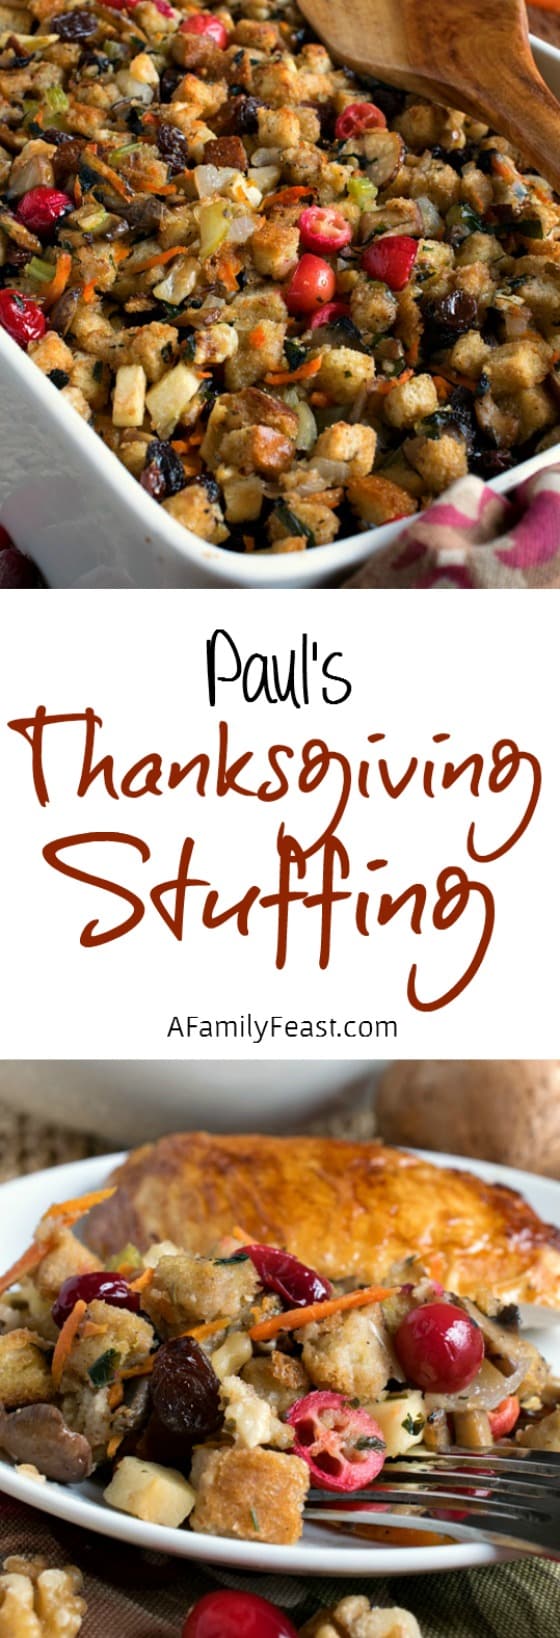 Paul's Thanksgiving Stuffing - A fantastic, easy Thanksgiving stuffing with lots of different savory and sweet flavors.